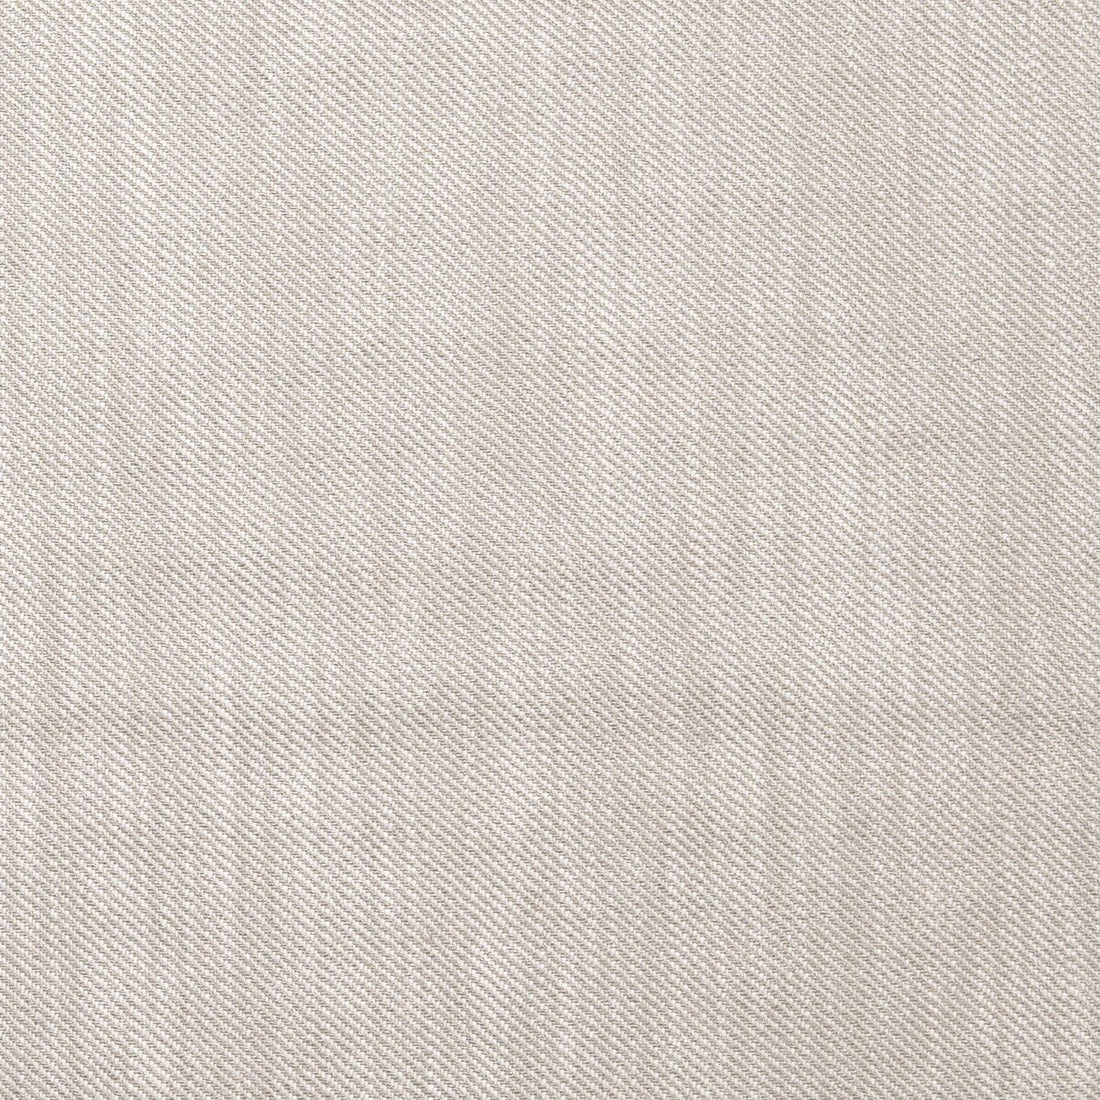 Victoria fabric in blanco color - pattern GDT5388.1.0 - by Gaston y Daniela in the Gaston Africalia collection